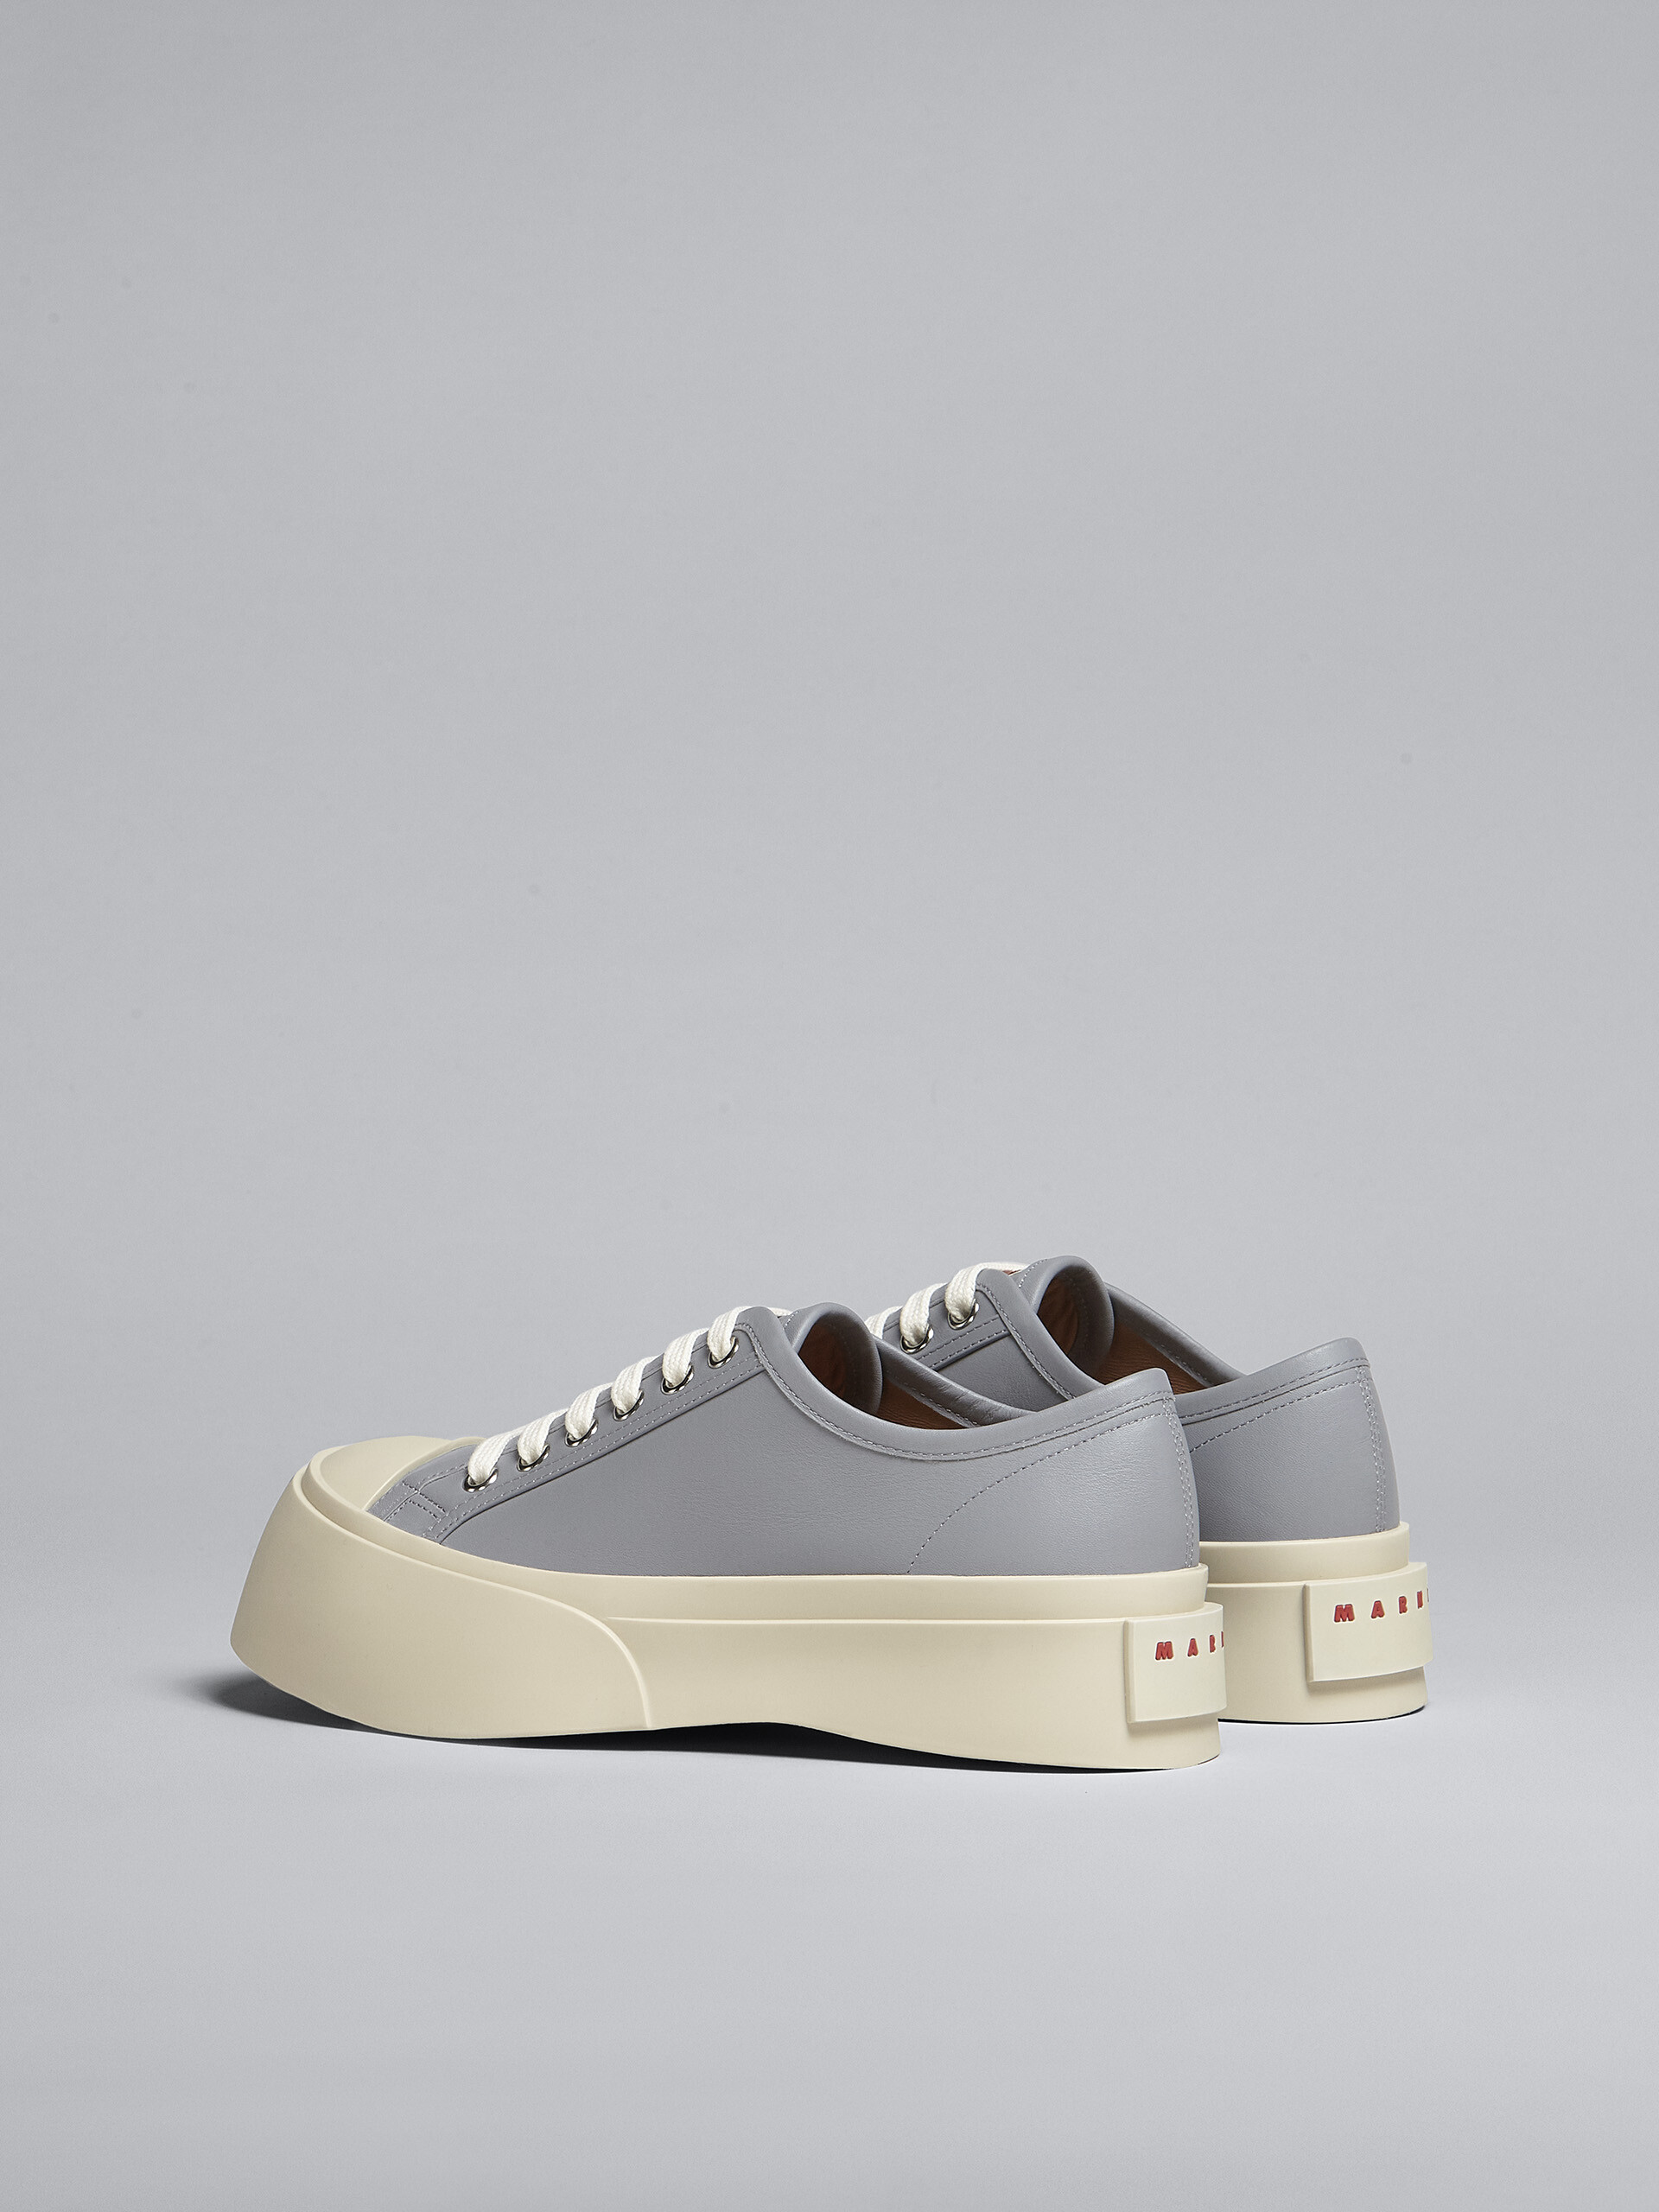 Light blue nappa leather Pablo lace-up sneaker - Sneakers - Image 3